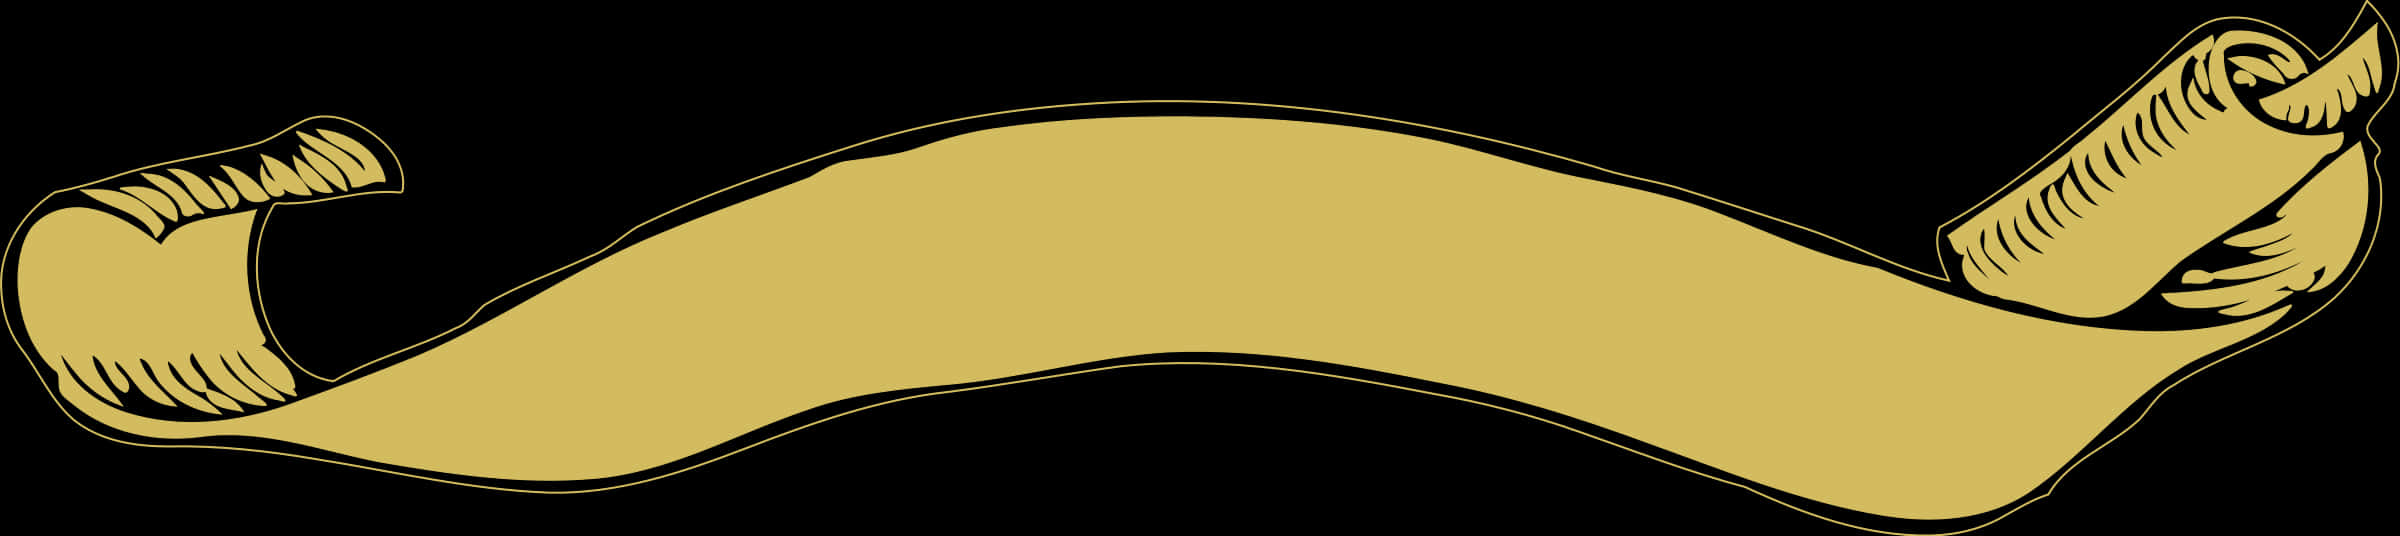 Golden Ancient Scroll Banner PNG image